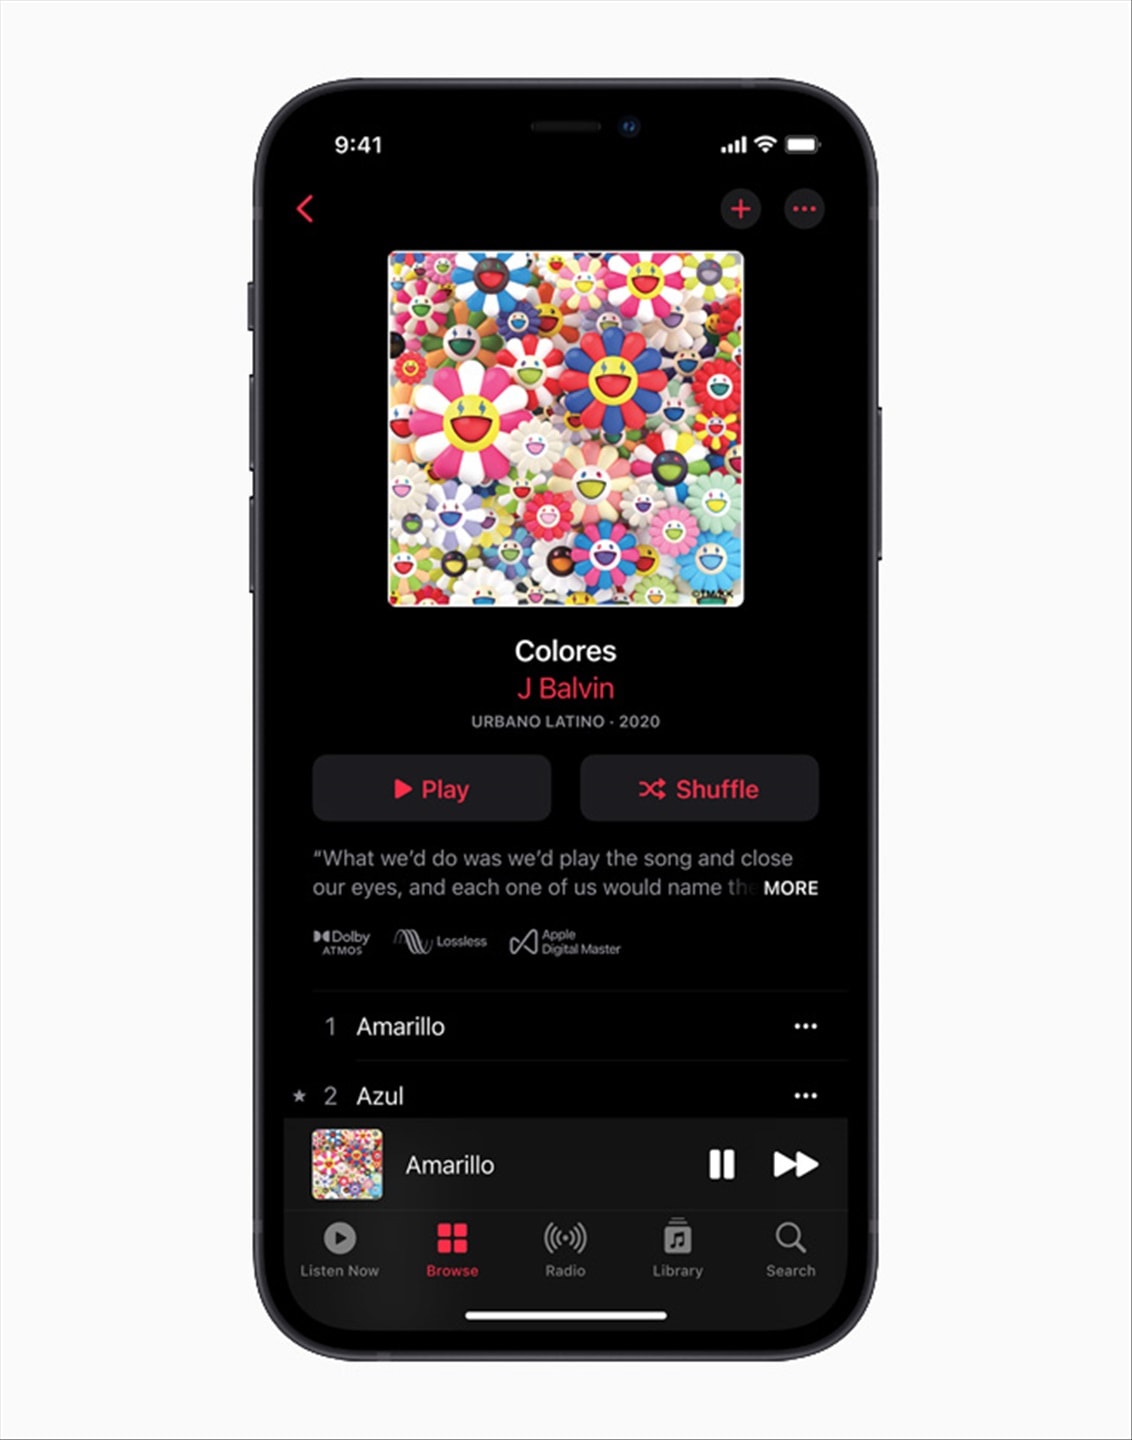 It’s official. Apple Music is offering lossless sound quality & Dolby Atmos